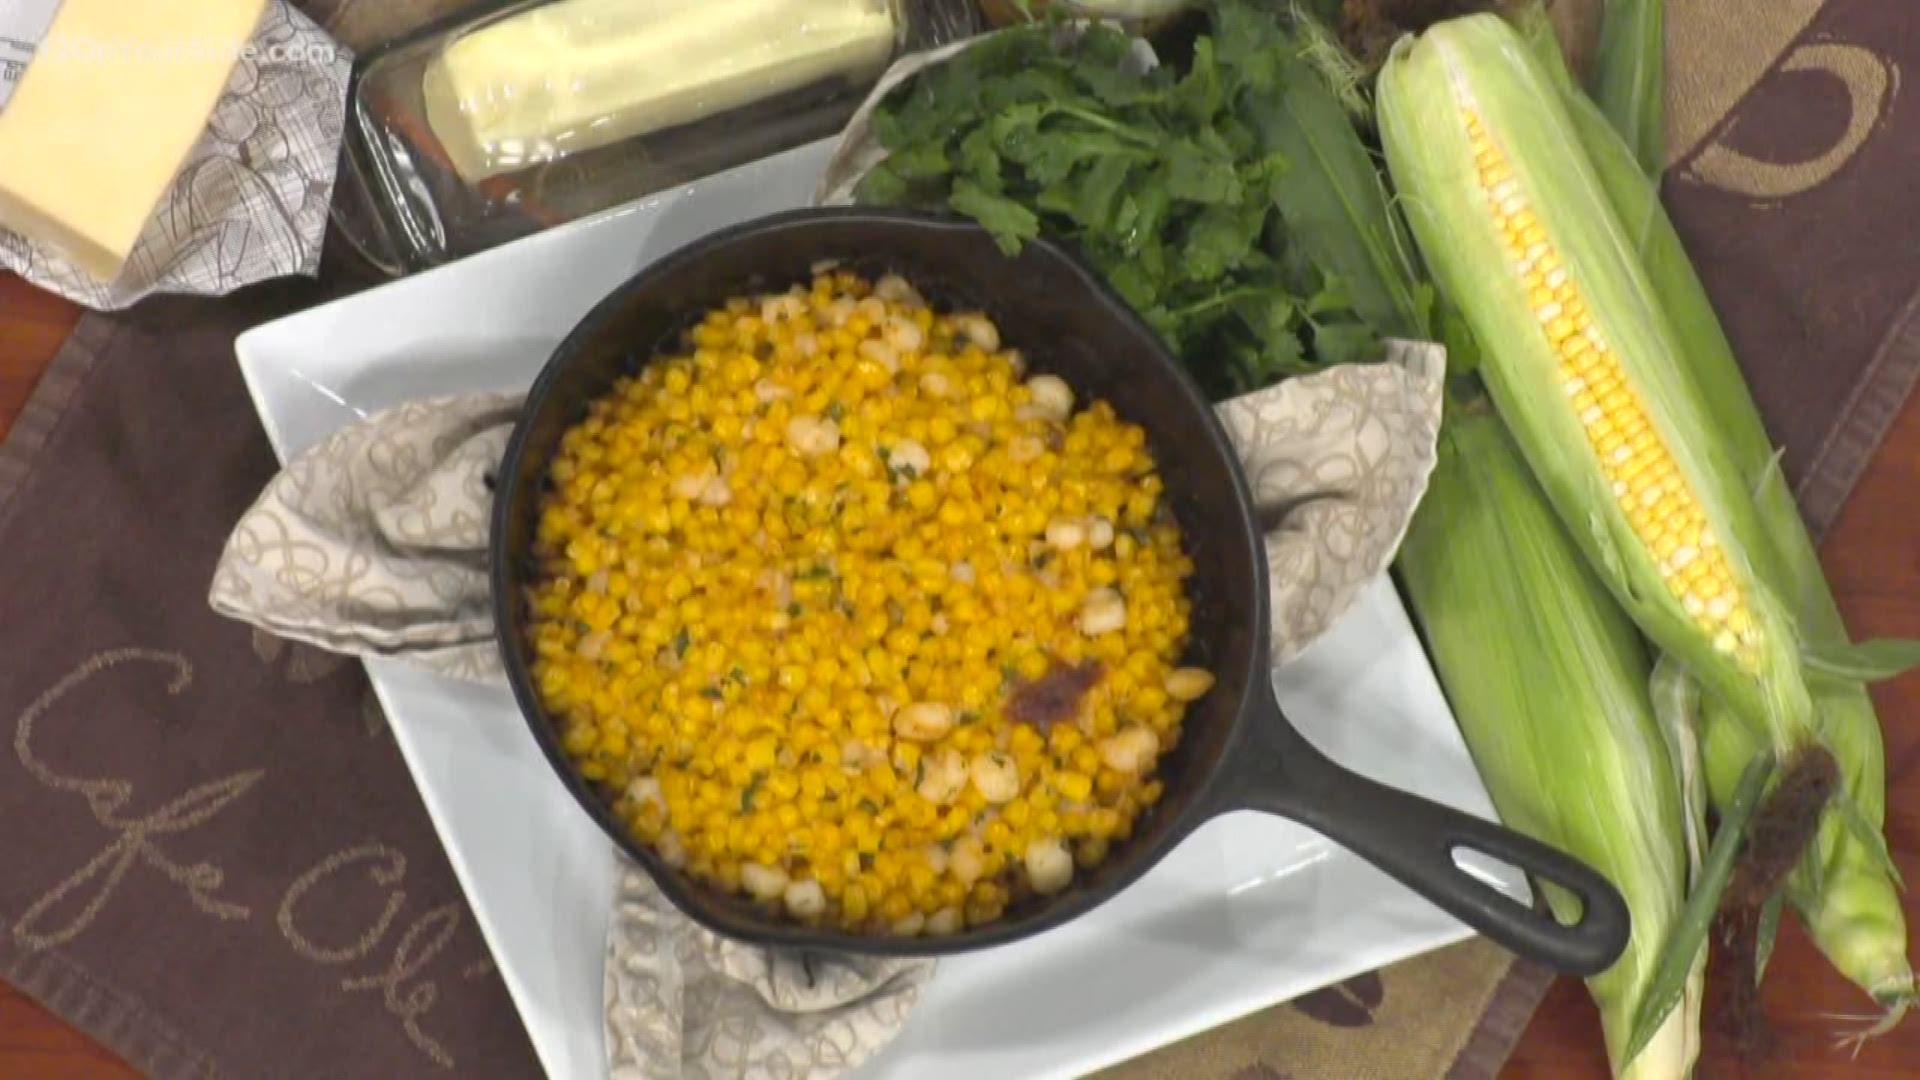 Take your chips and salsa to the next level with the Ginger Chef's recipe of Mexican street corn dip. It's perfect for the next party or barbecue.